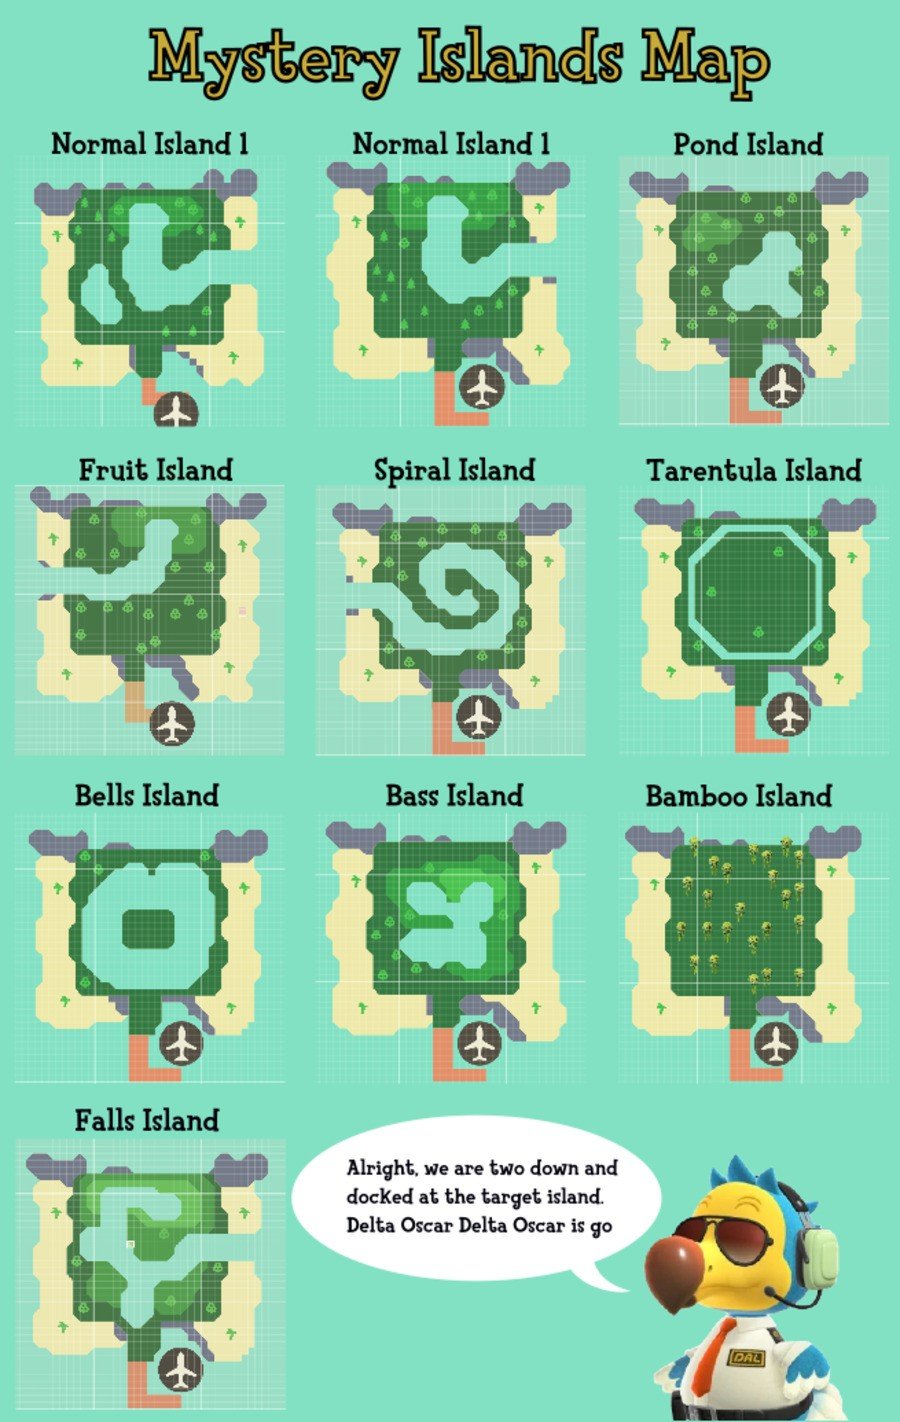 Animal Crossing: New Horizons: Nook Miles Ticket Mystery Island Tours - How To Other Islands Island Types | Nintendo Life